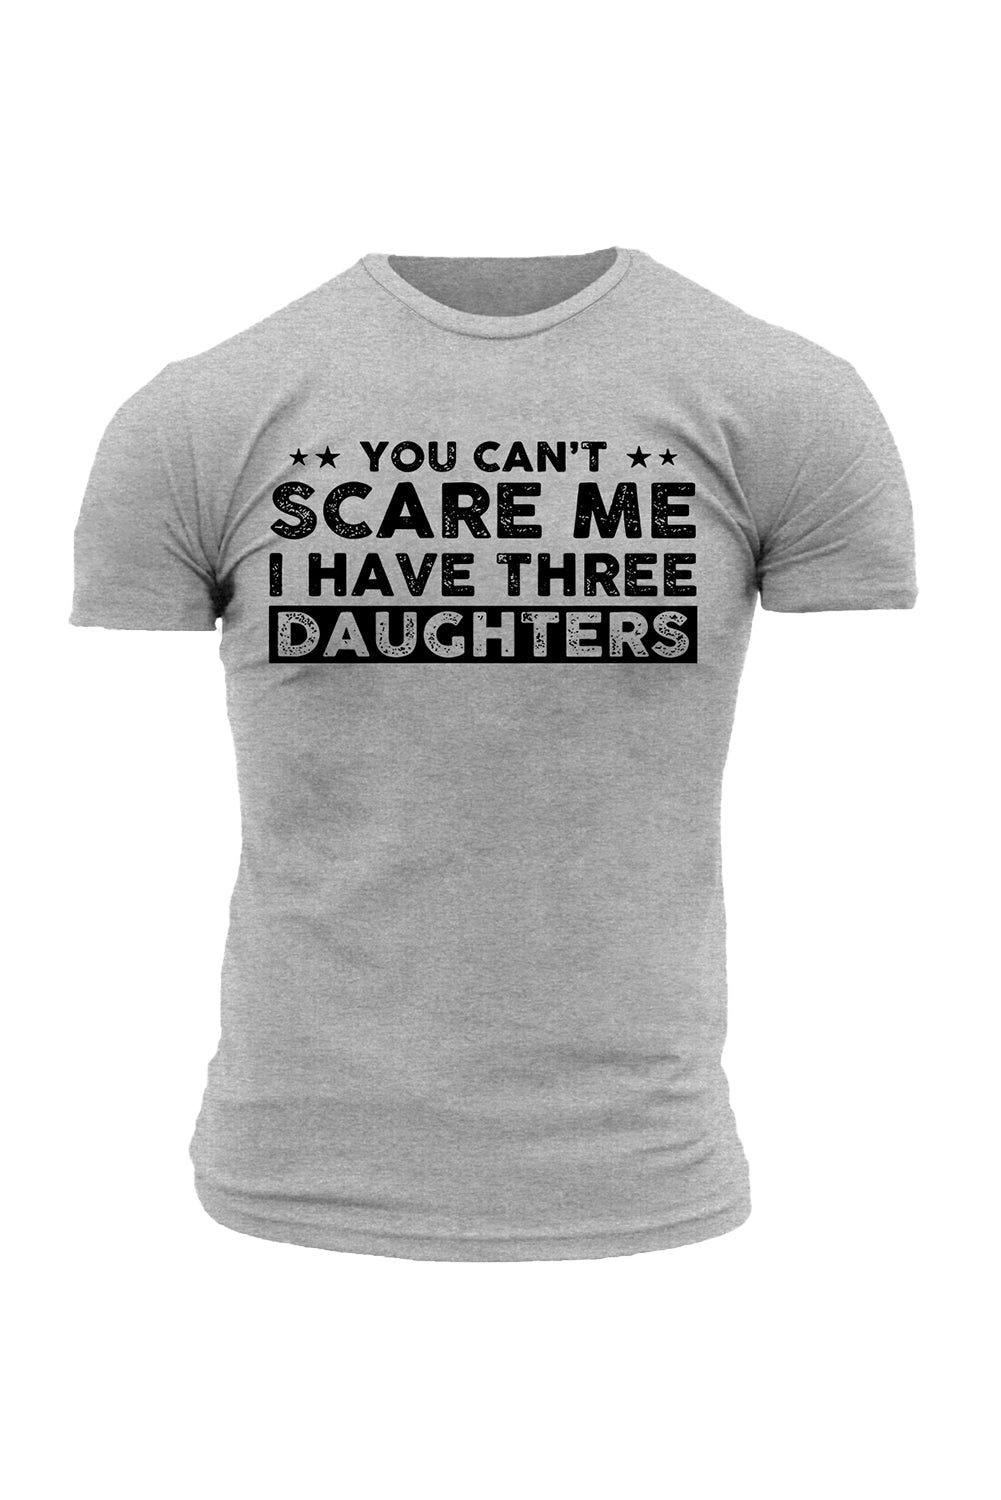 Gray You Can't Scare Me, I Have Three Daughters Men's Graphic Tee Men's Tops JT's Designer Fashion